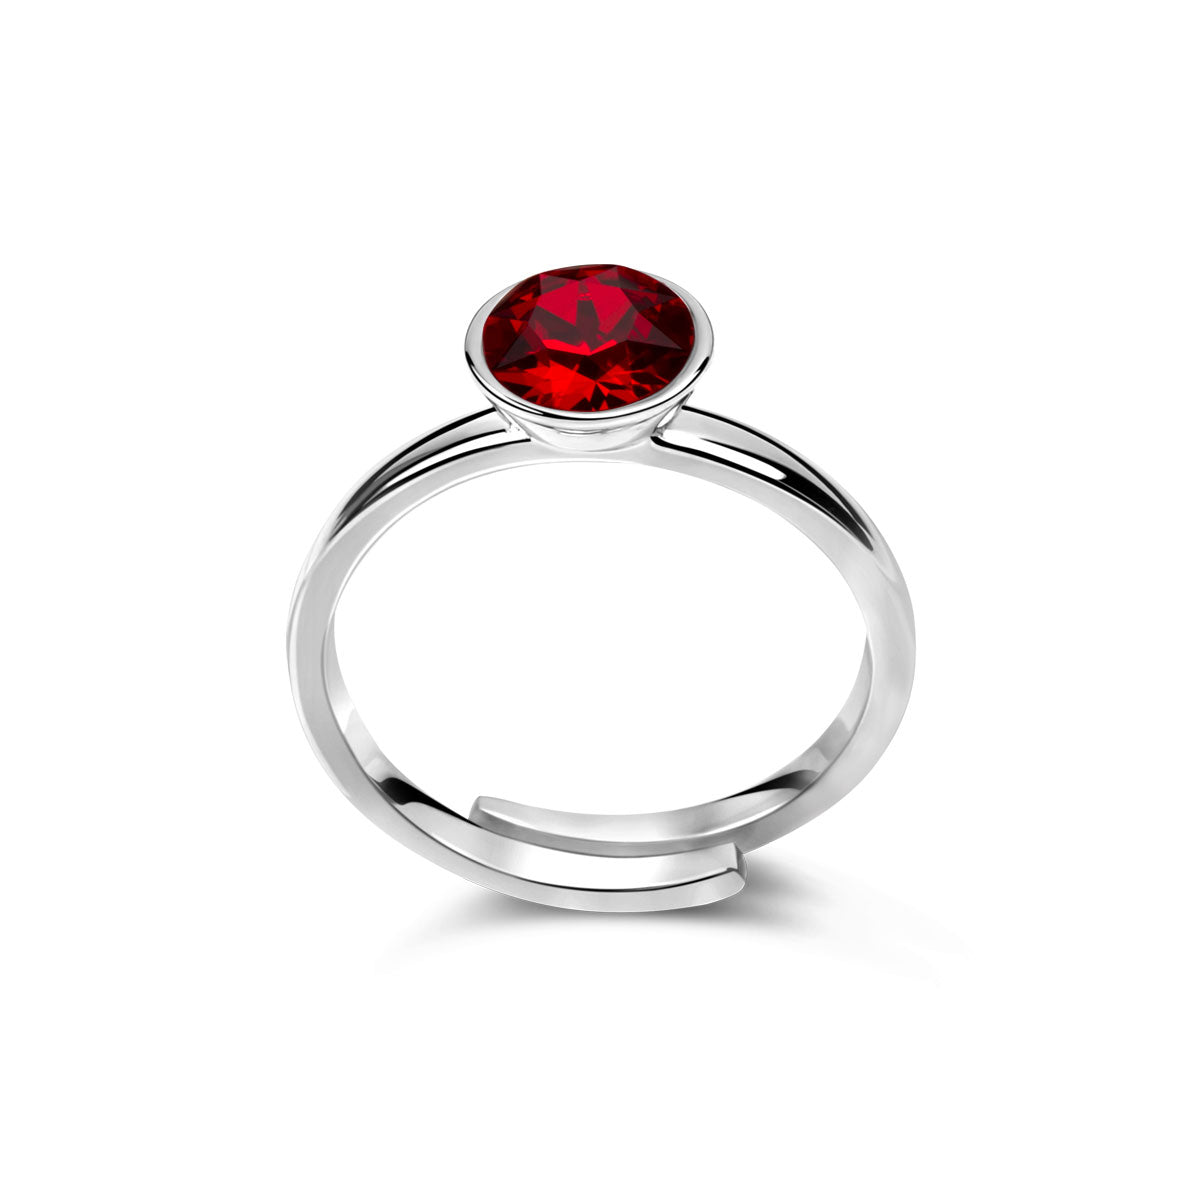 Ring 925 Silber roter Stein#oberflache_silber